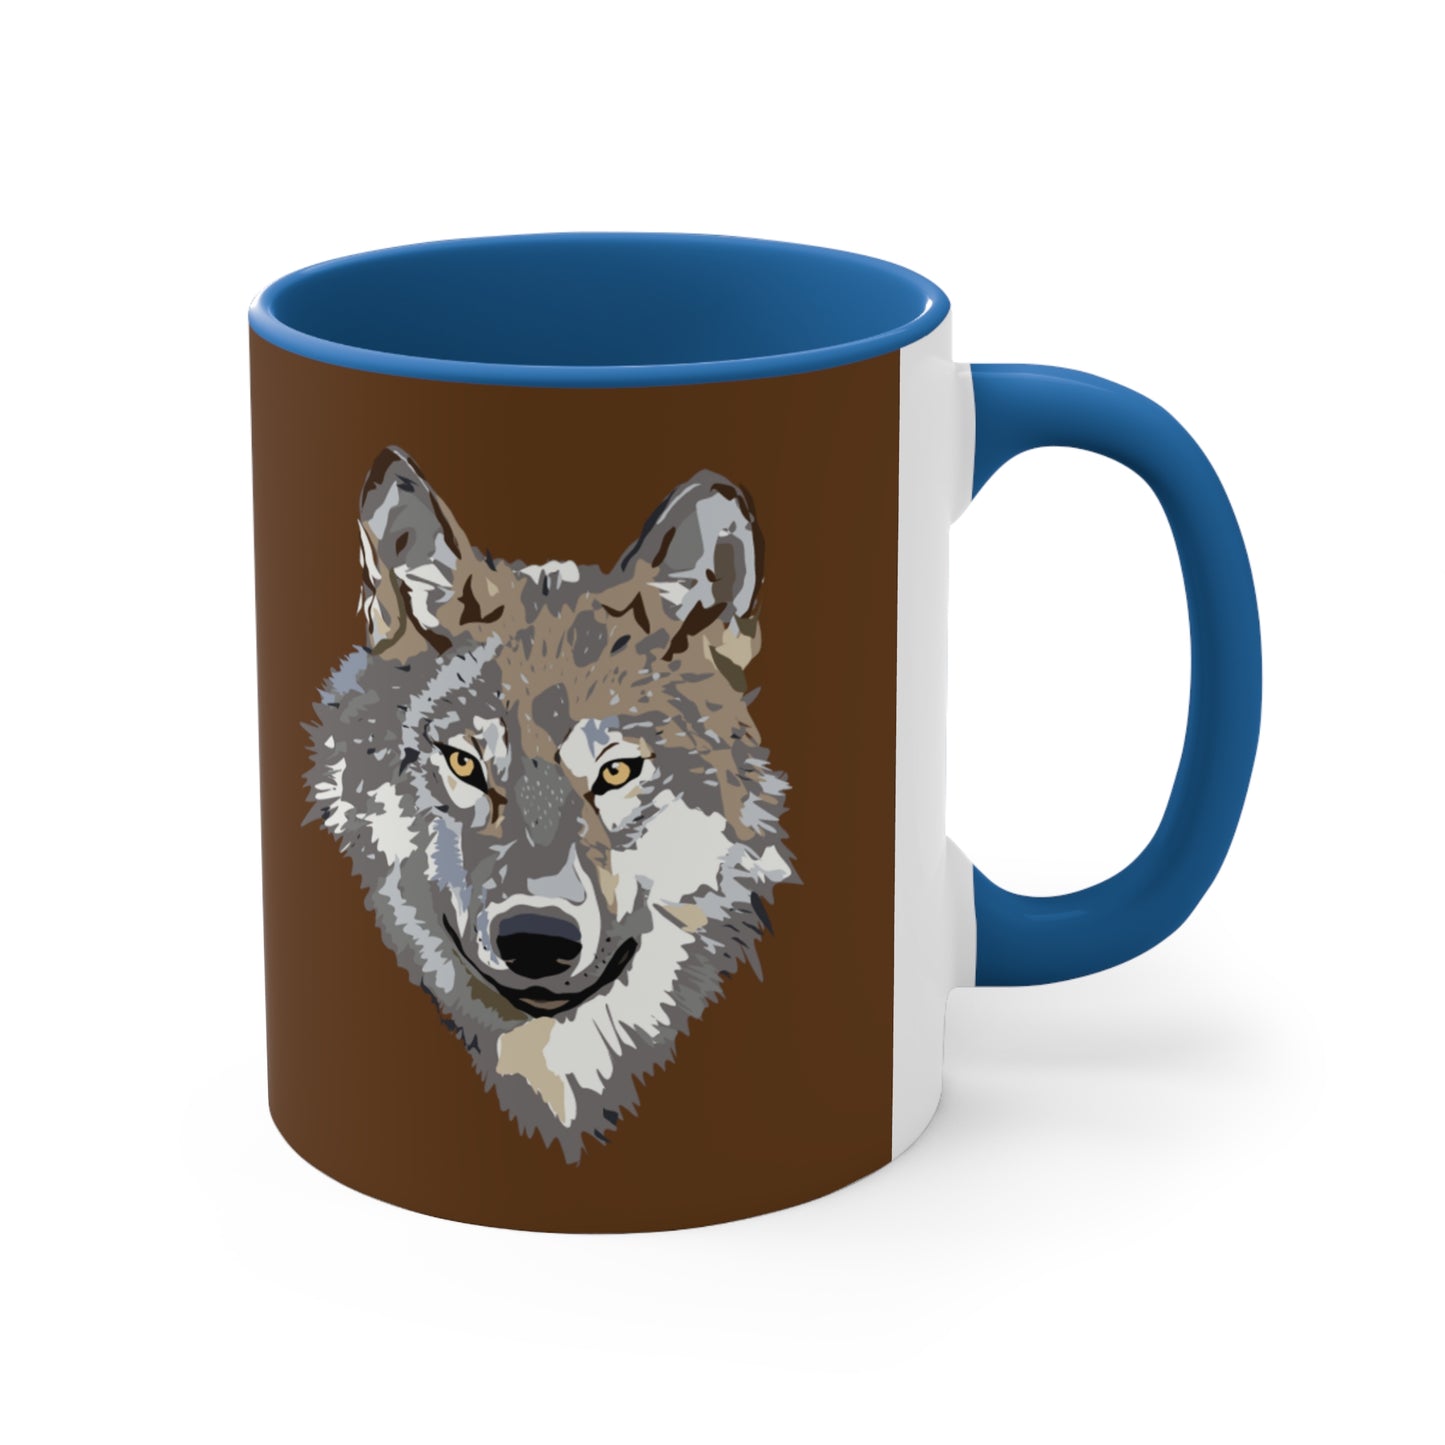 Accent Coffee Mug, 11oz: Wolves Brown